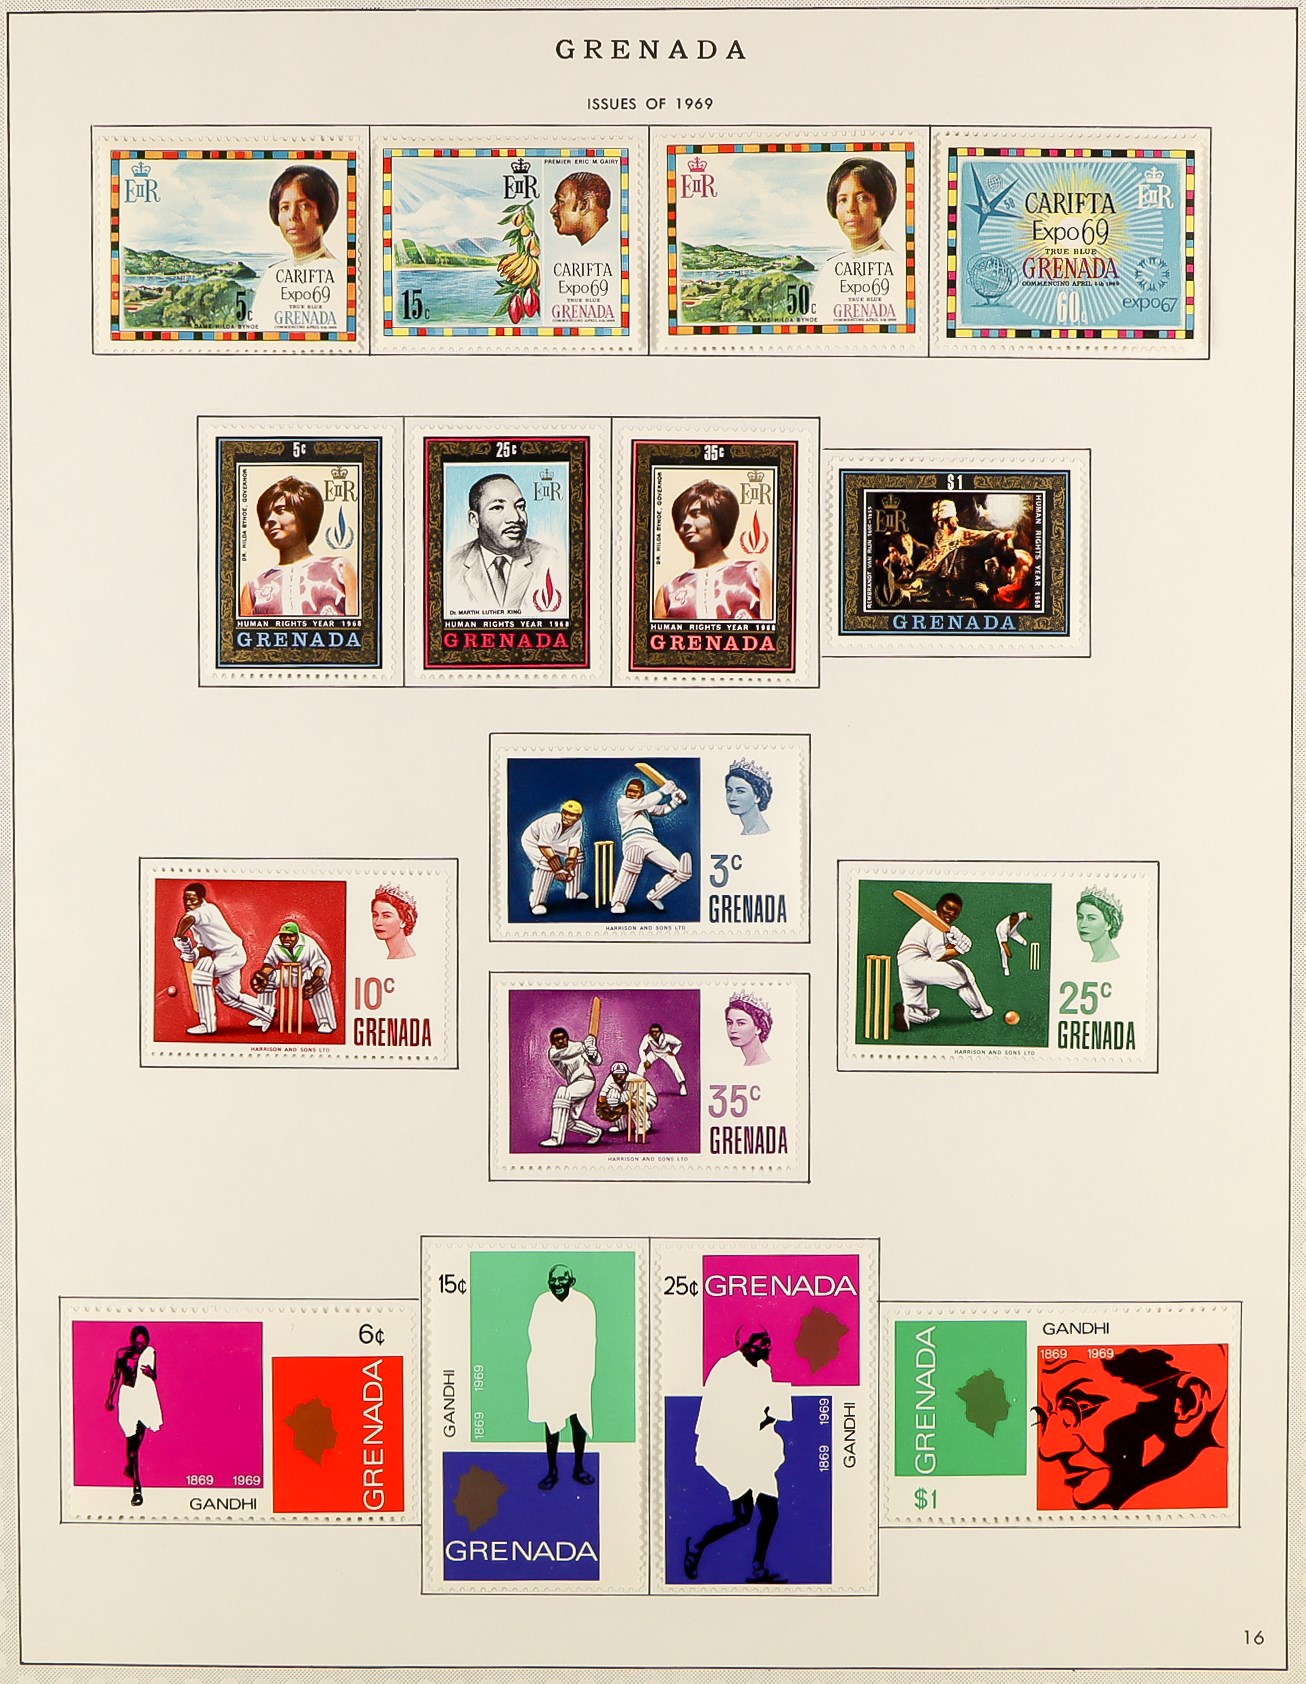 GRENADA 1953 - 1983 COLLECTION in album of chiefly never hinged mint sets & miniature sheets, some - Image 2 of 15